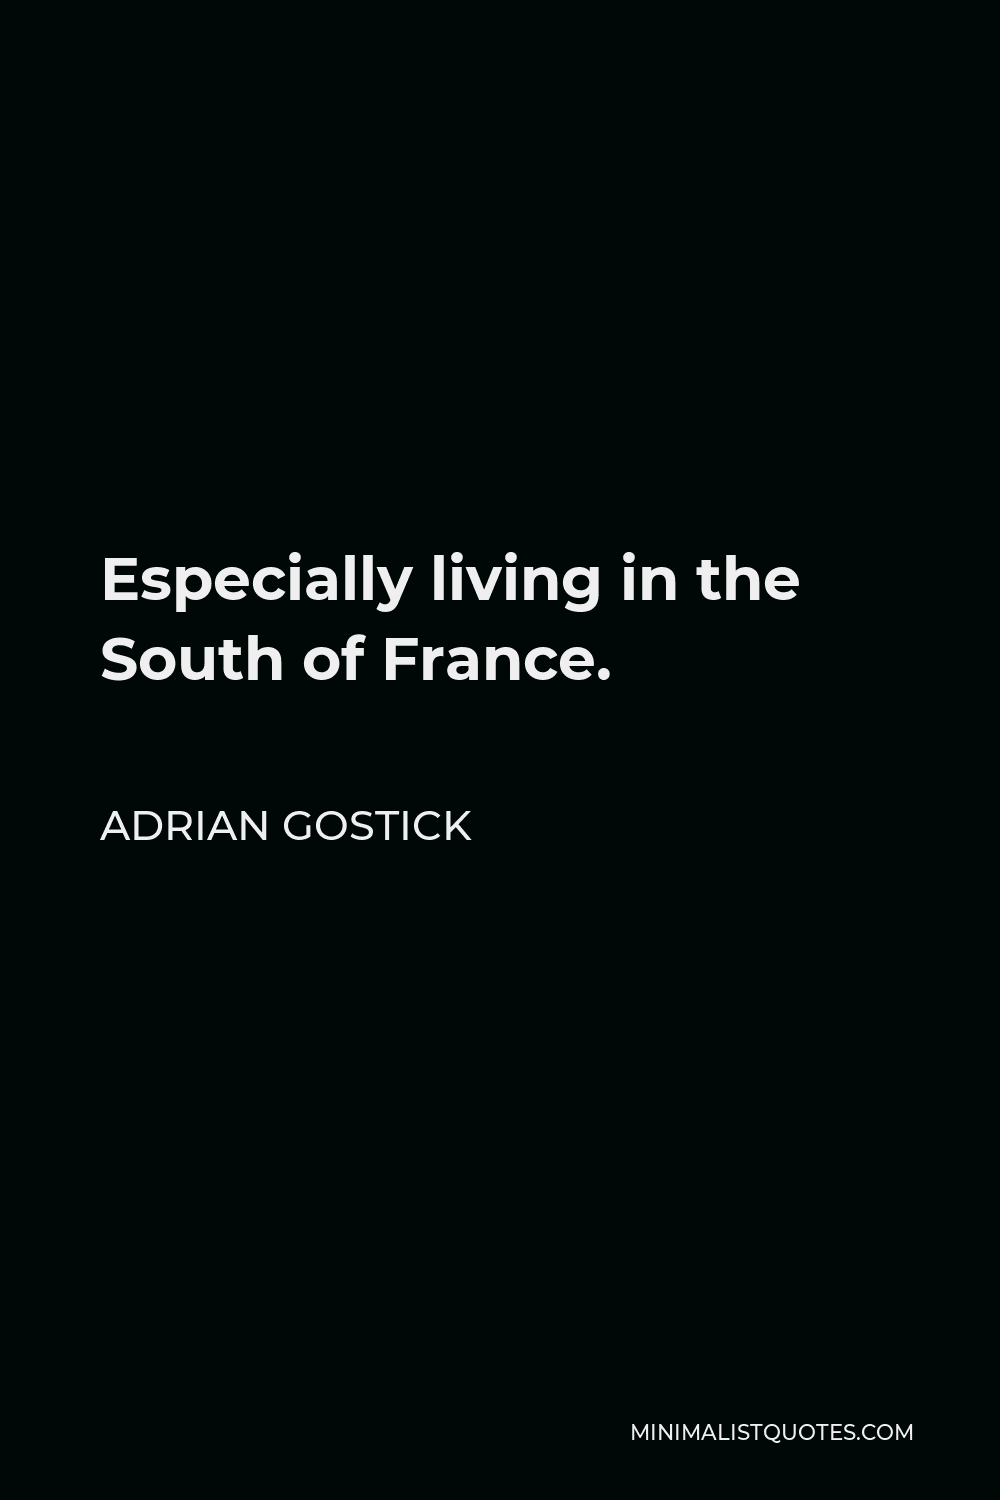 Adrian Gostick Quote - Especially living in the South of France.